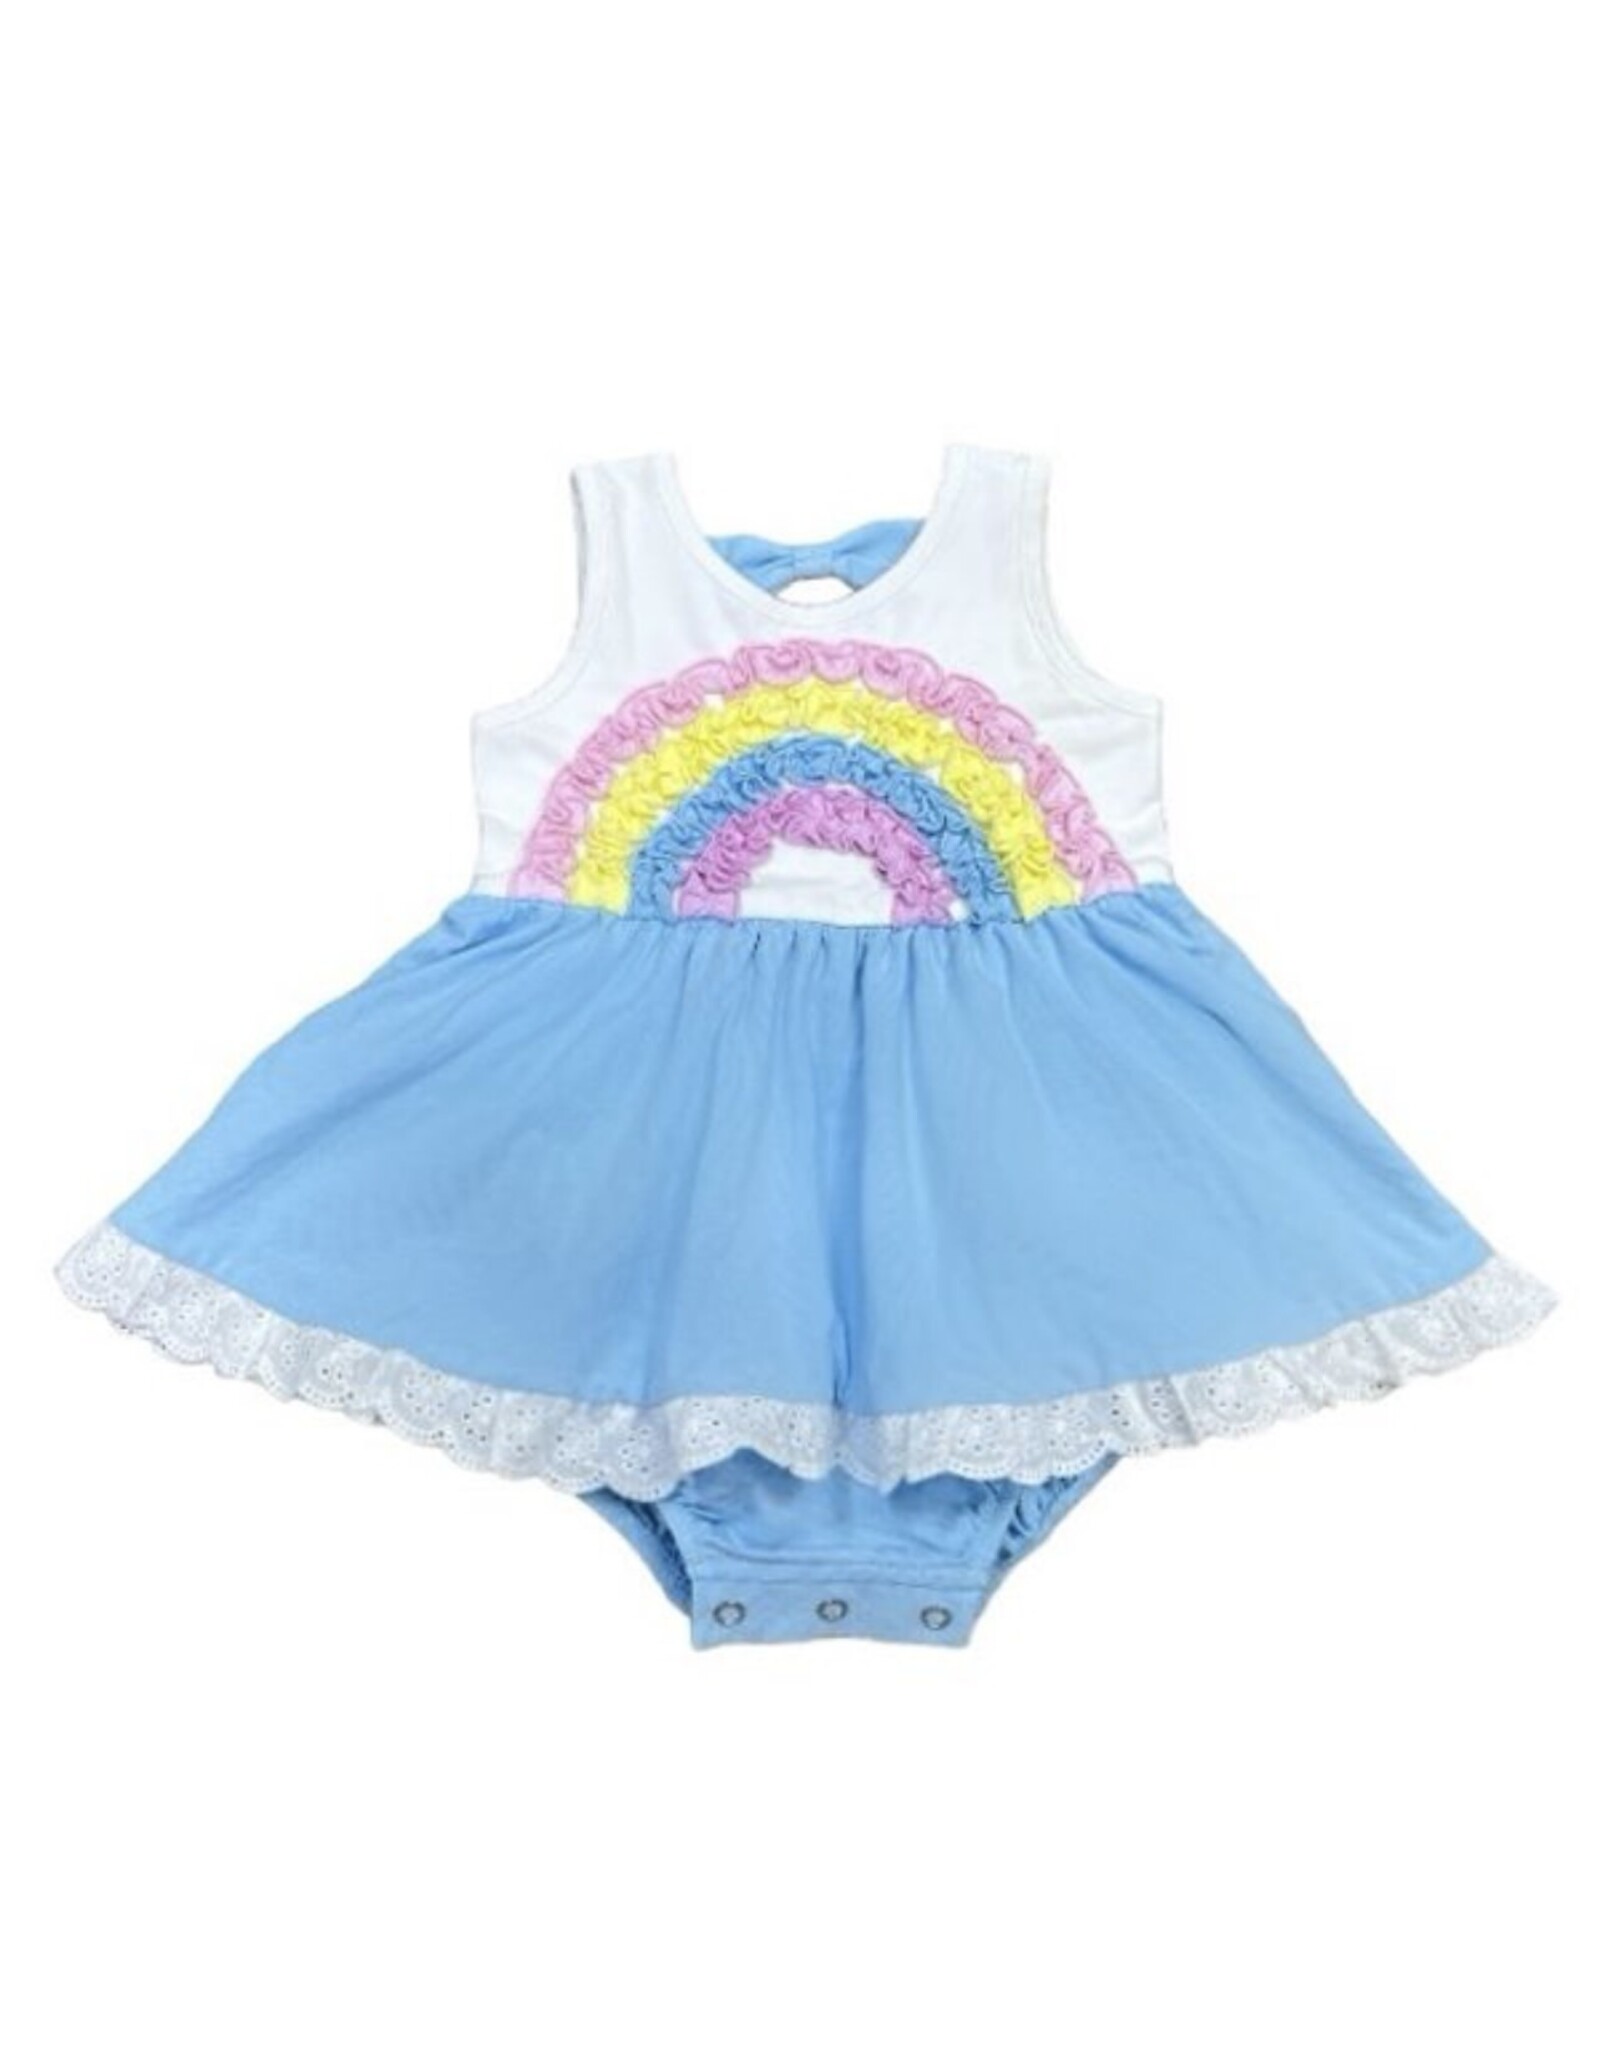 Swoon Baby Swoon Baby- Rainbow Bright Eyelet Bubble Dress